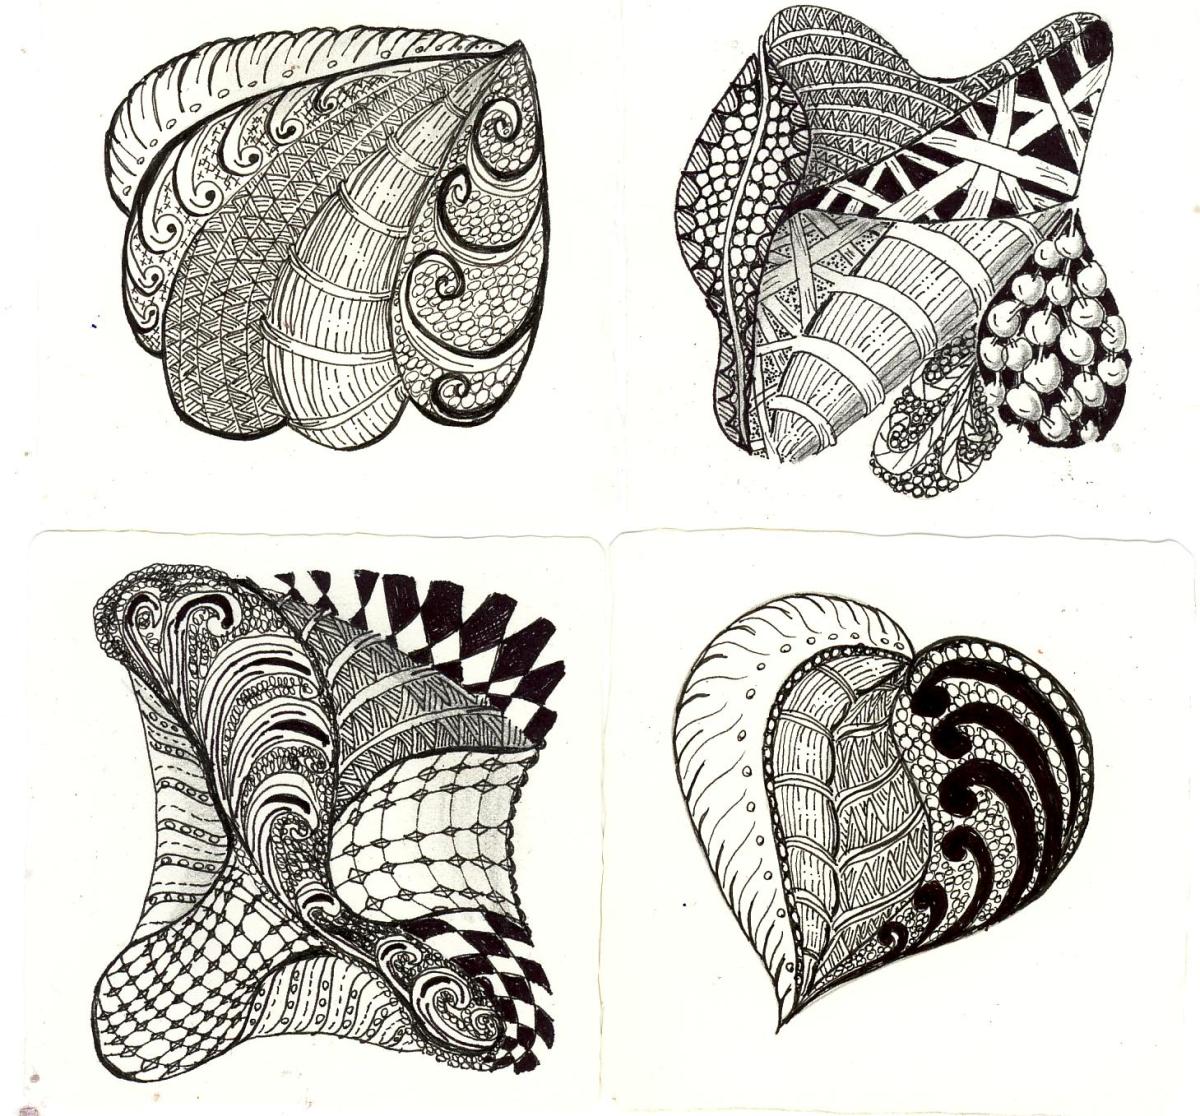 Zentangle, Zendoodles - What Are They? | HubPages